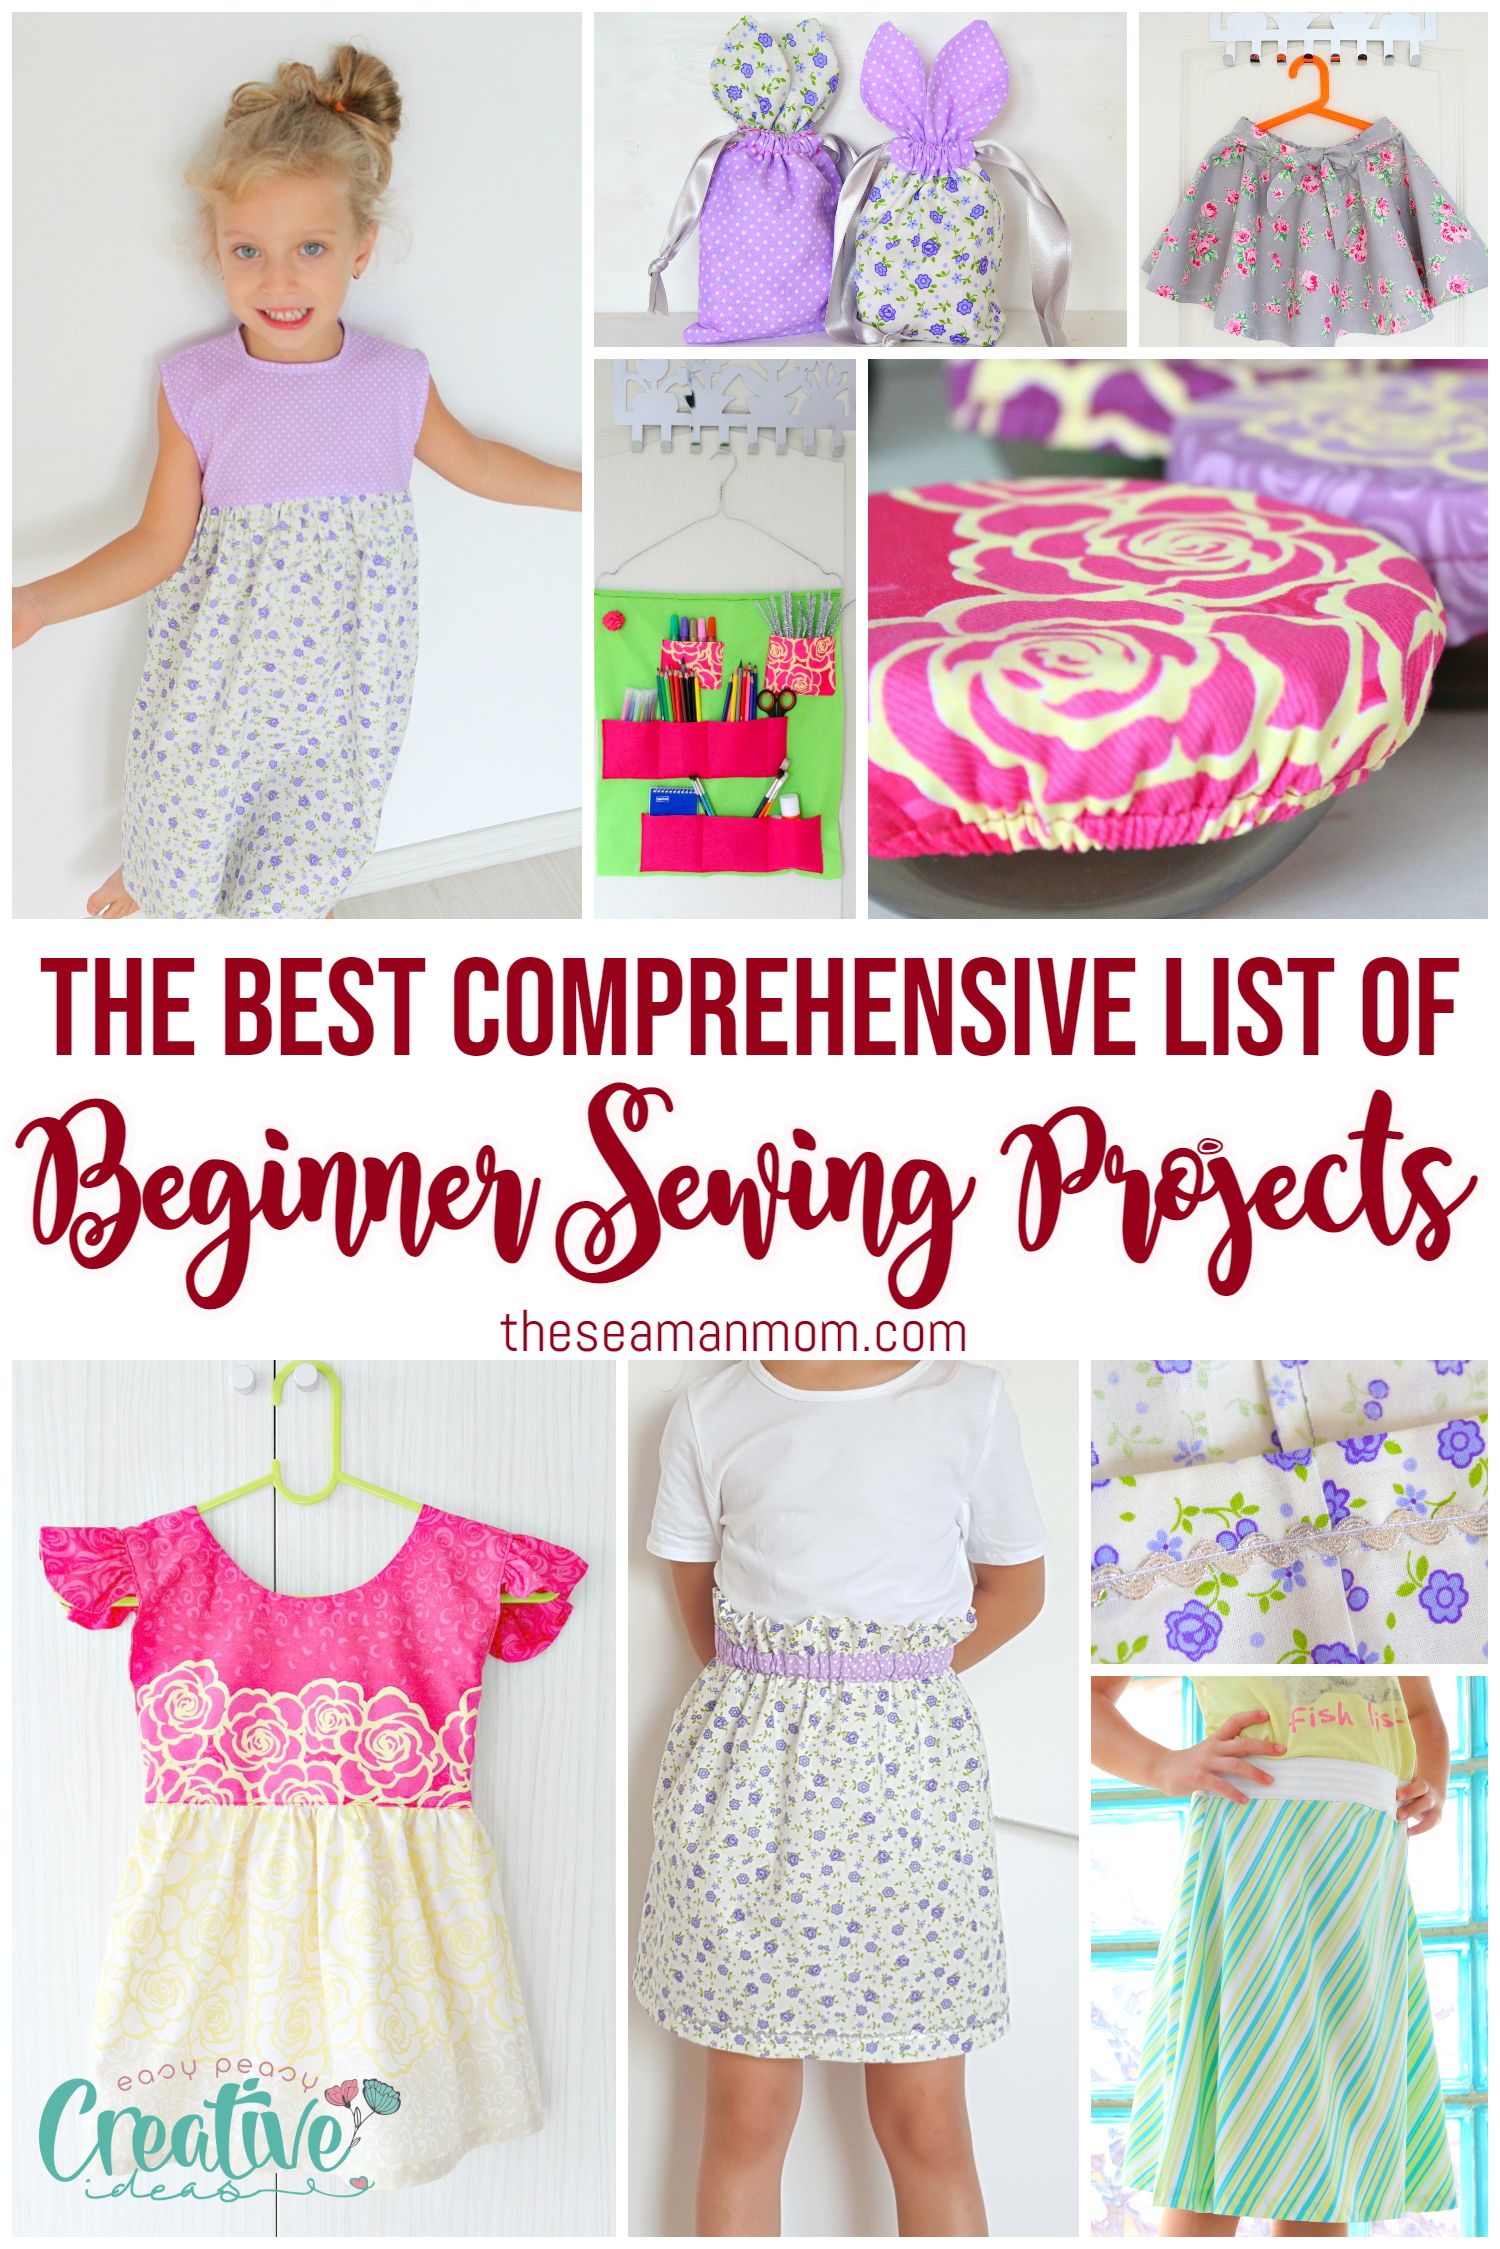 Are you new to sewing and looking for beginner sewing projects? Or maybe you're a seasoned sewer, but you're looking for some easy sewing projects? Either way, I've got you covered!

In this article, I'll share a comprehensive list of beginner sewing projects that are perfect for sewers of all levels. From simple garments to home décor projects, I've got beginner sewing projects for everyone and every skill. via @petroneagu